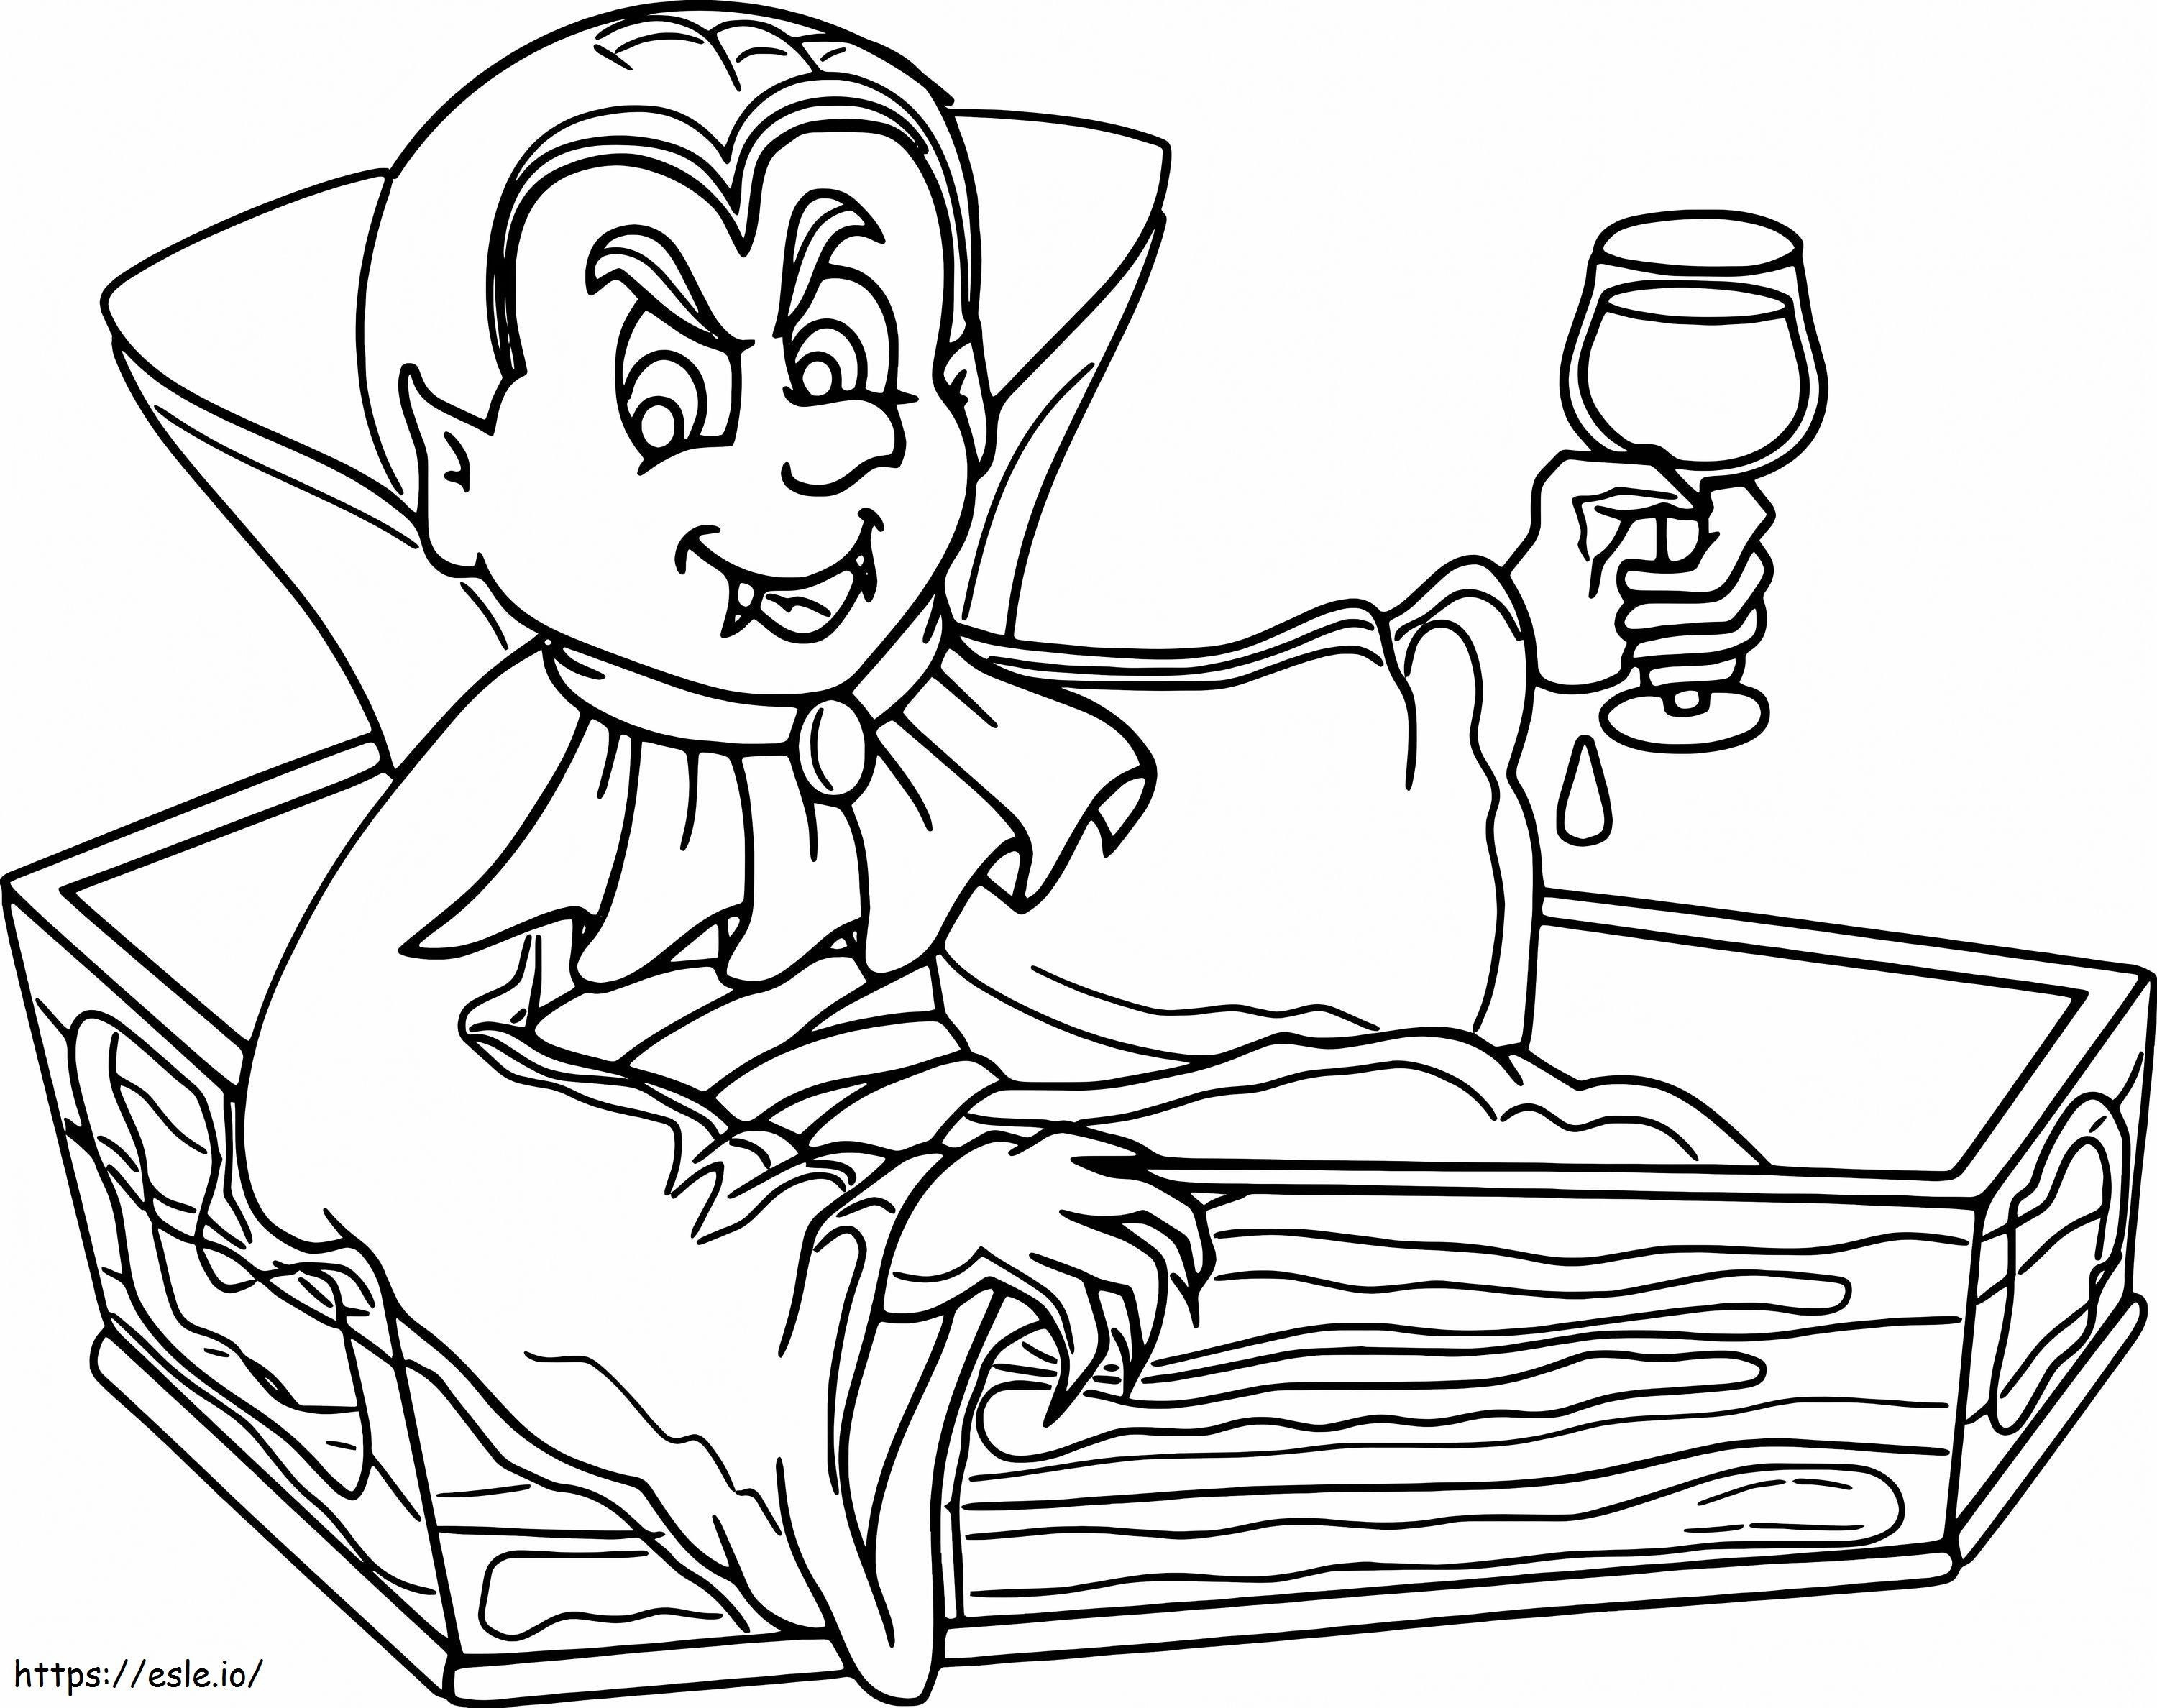 Dracula Sitting On The Coffin coloring page